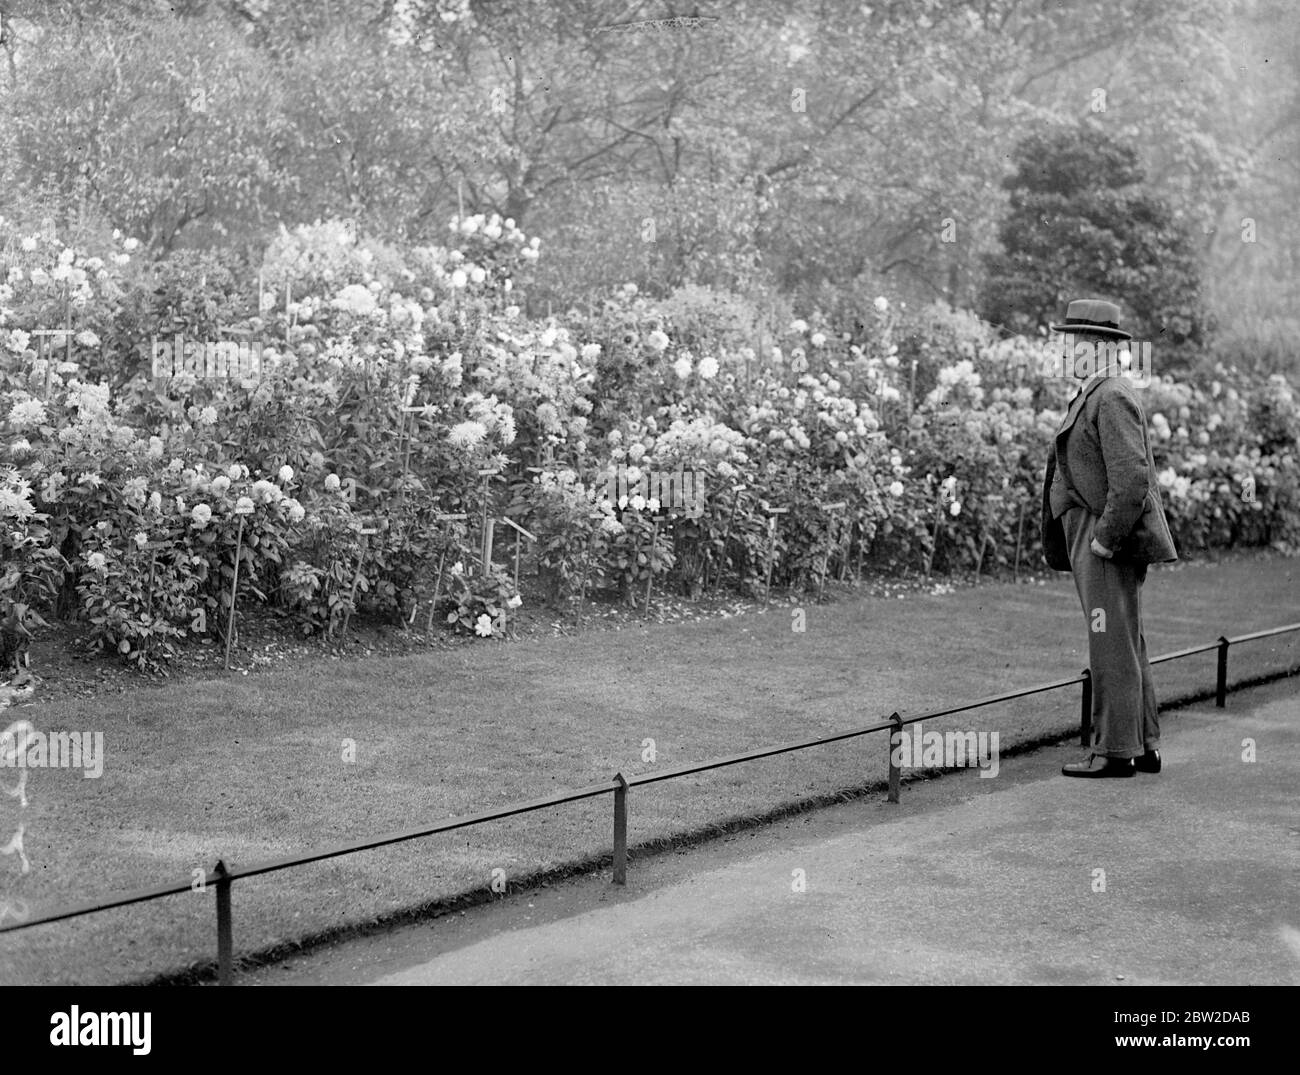 Sir Thomas Inskip, Minister for coordination of defence, forgets problems of deathdealing guns and planes to admire the magnificent show of dahlias as he passes through St James's Park on his way to musty Whitehall. 22 October 1938 Stock Photo